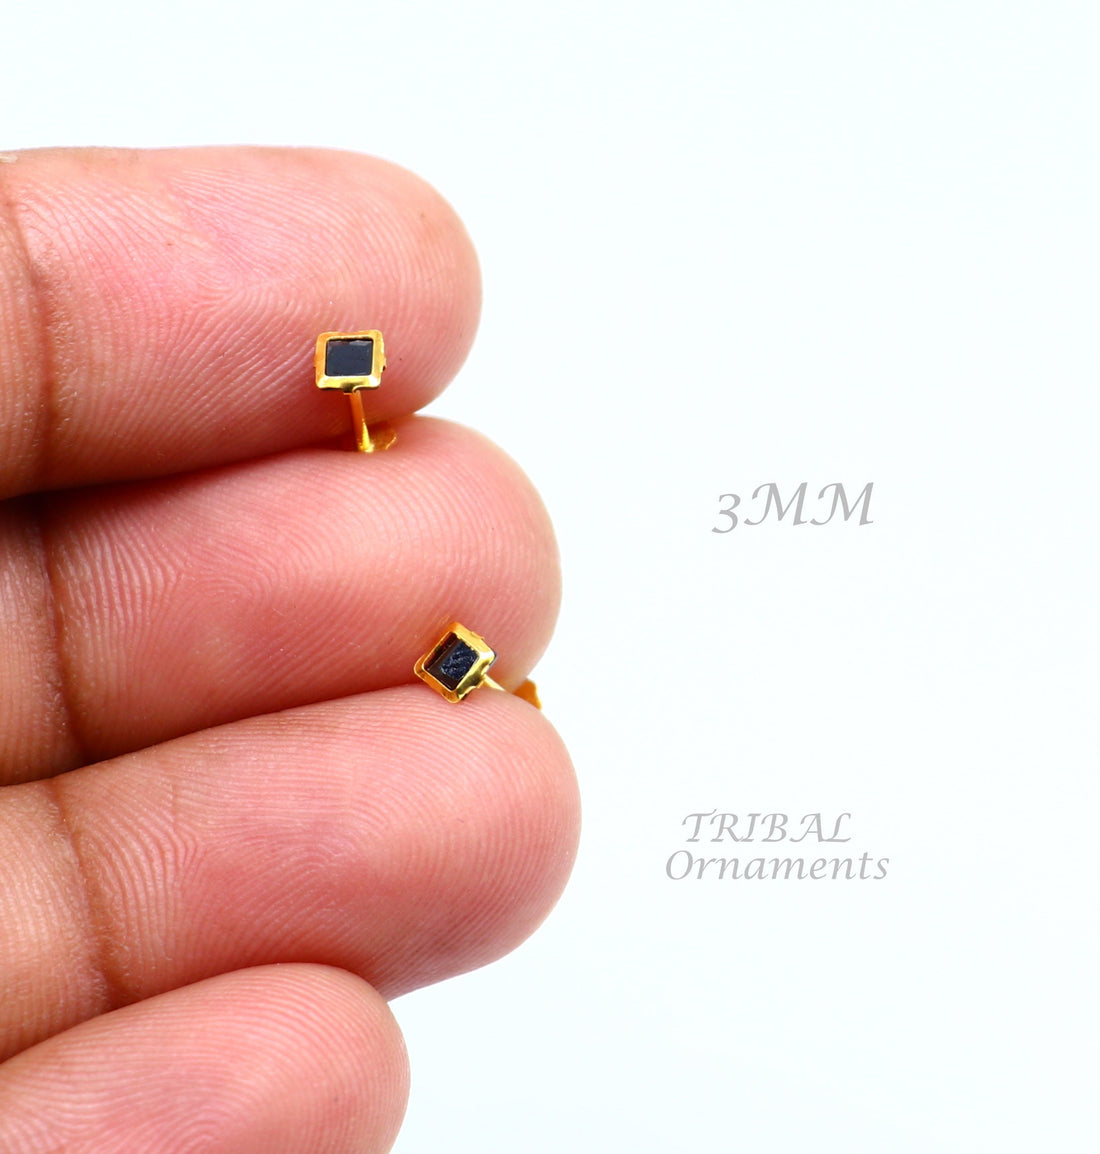 3MM/3.5MM/4MM 18kt yellow gold handmade black stone stud earring, excellent light weight daily use customized gifting unisex jewelry er158 - TRIBAL ORNAMENTS